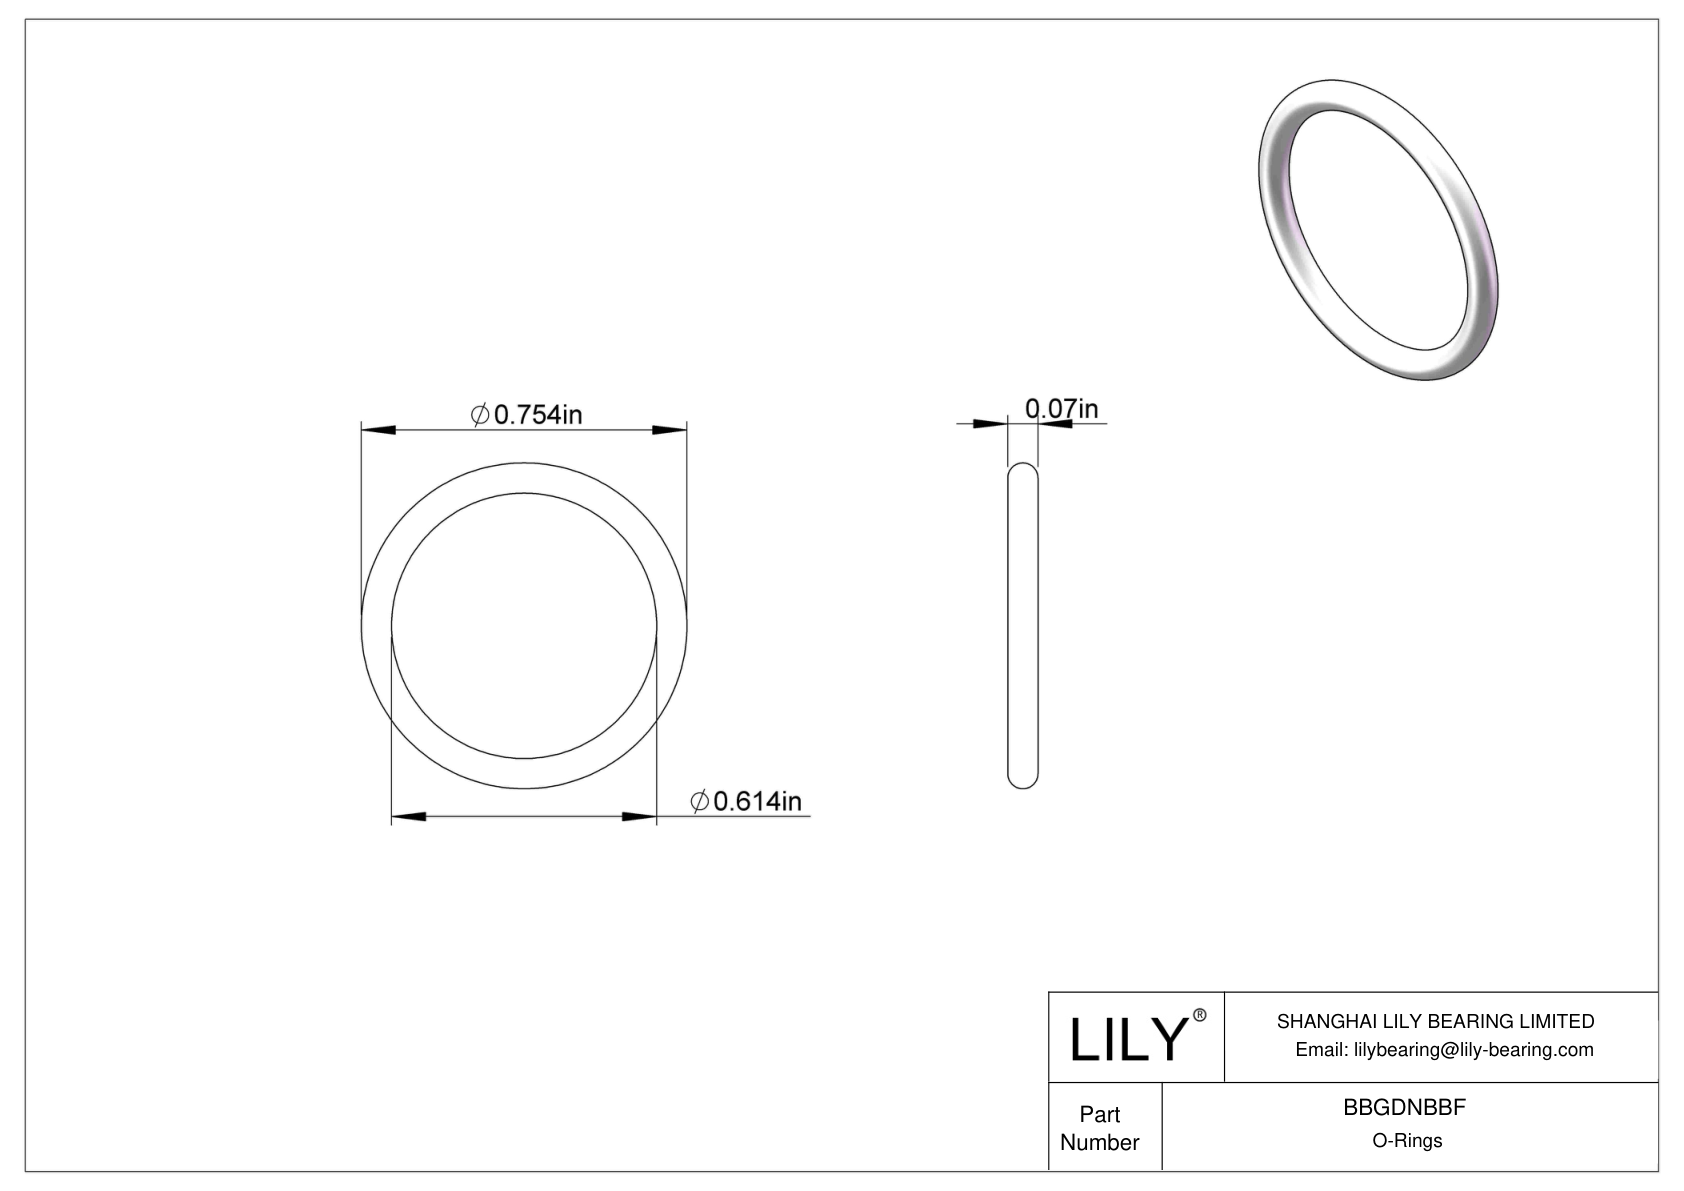 BBGDNBBF Chemical Resistant O-rings Round cad drawing